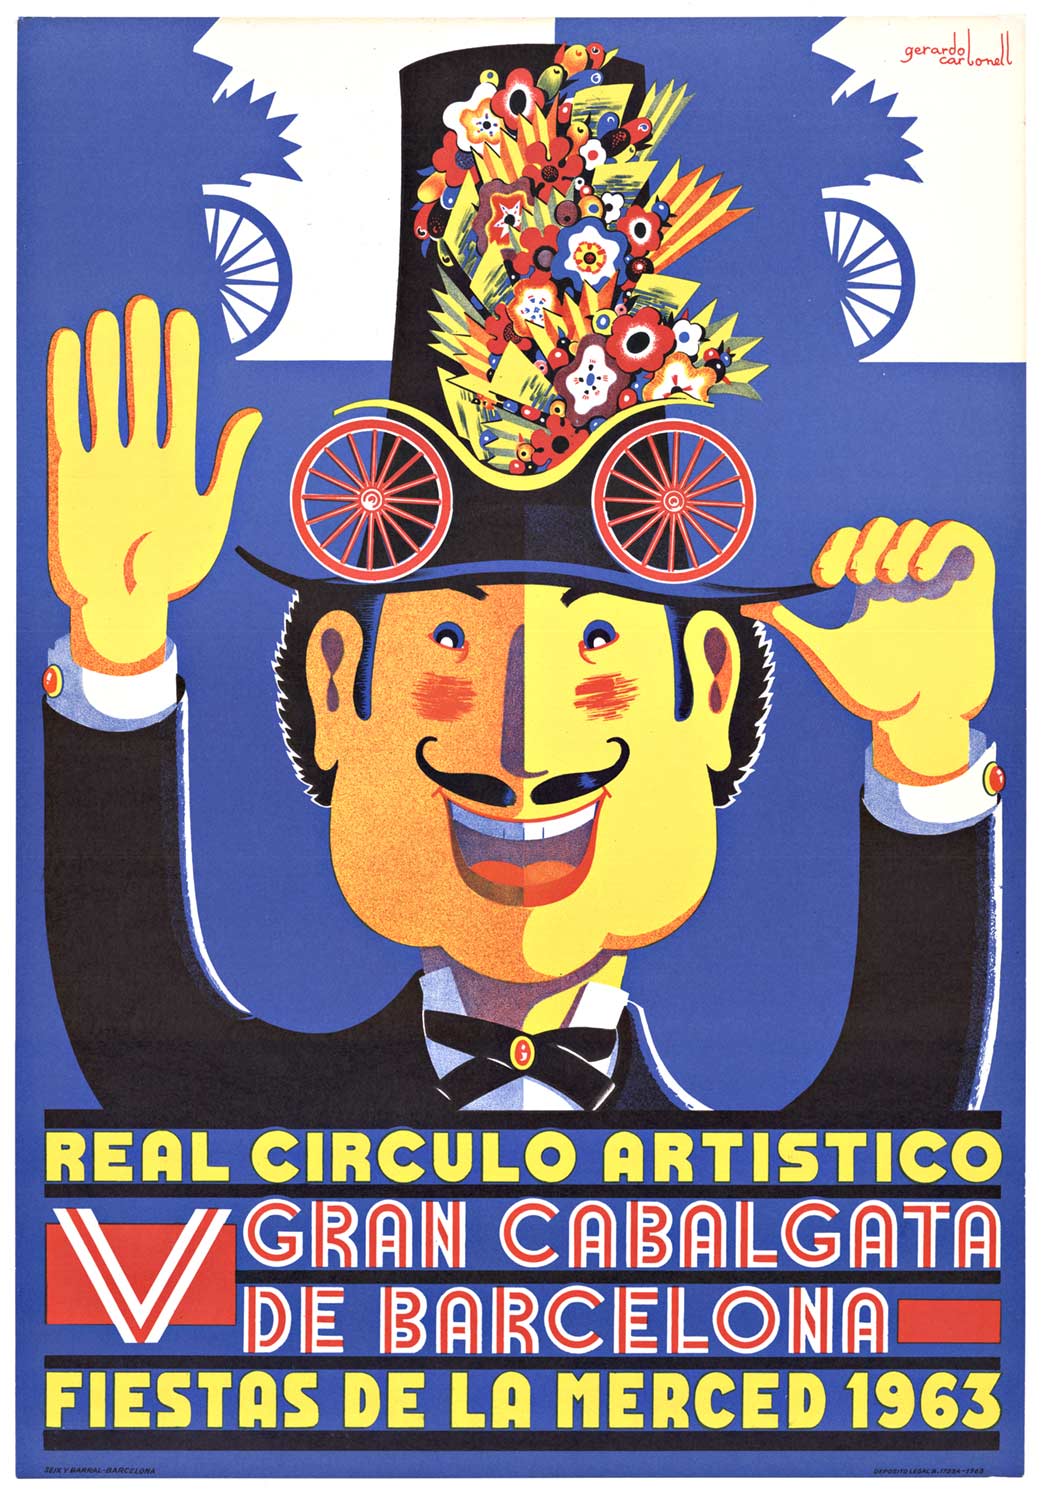 Original Real Circulo Artistico Gran Cabalgata de Barcelona vintage poster. . A fun and uplifting image with smiles, parties, and flowers. <br> <br>Real Circulo Artistico is an institution dedicated to supporting the arts in Barcelona. The Gran Cab